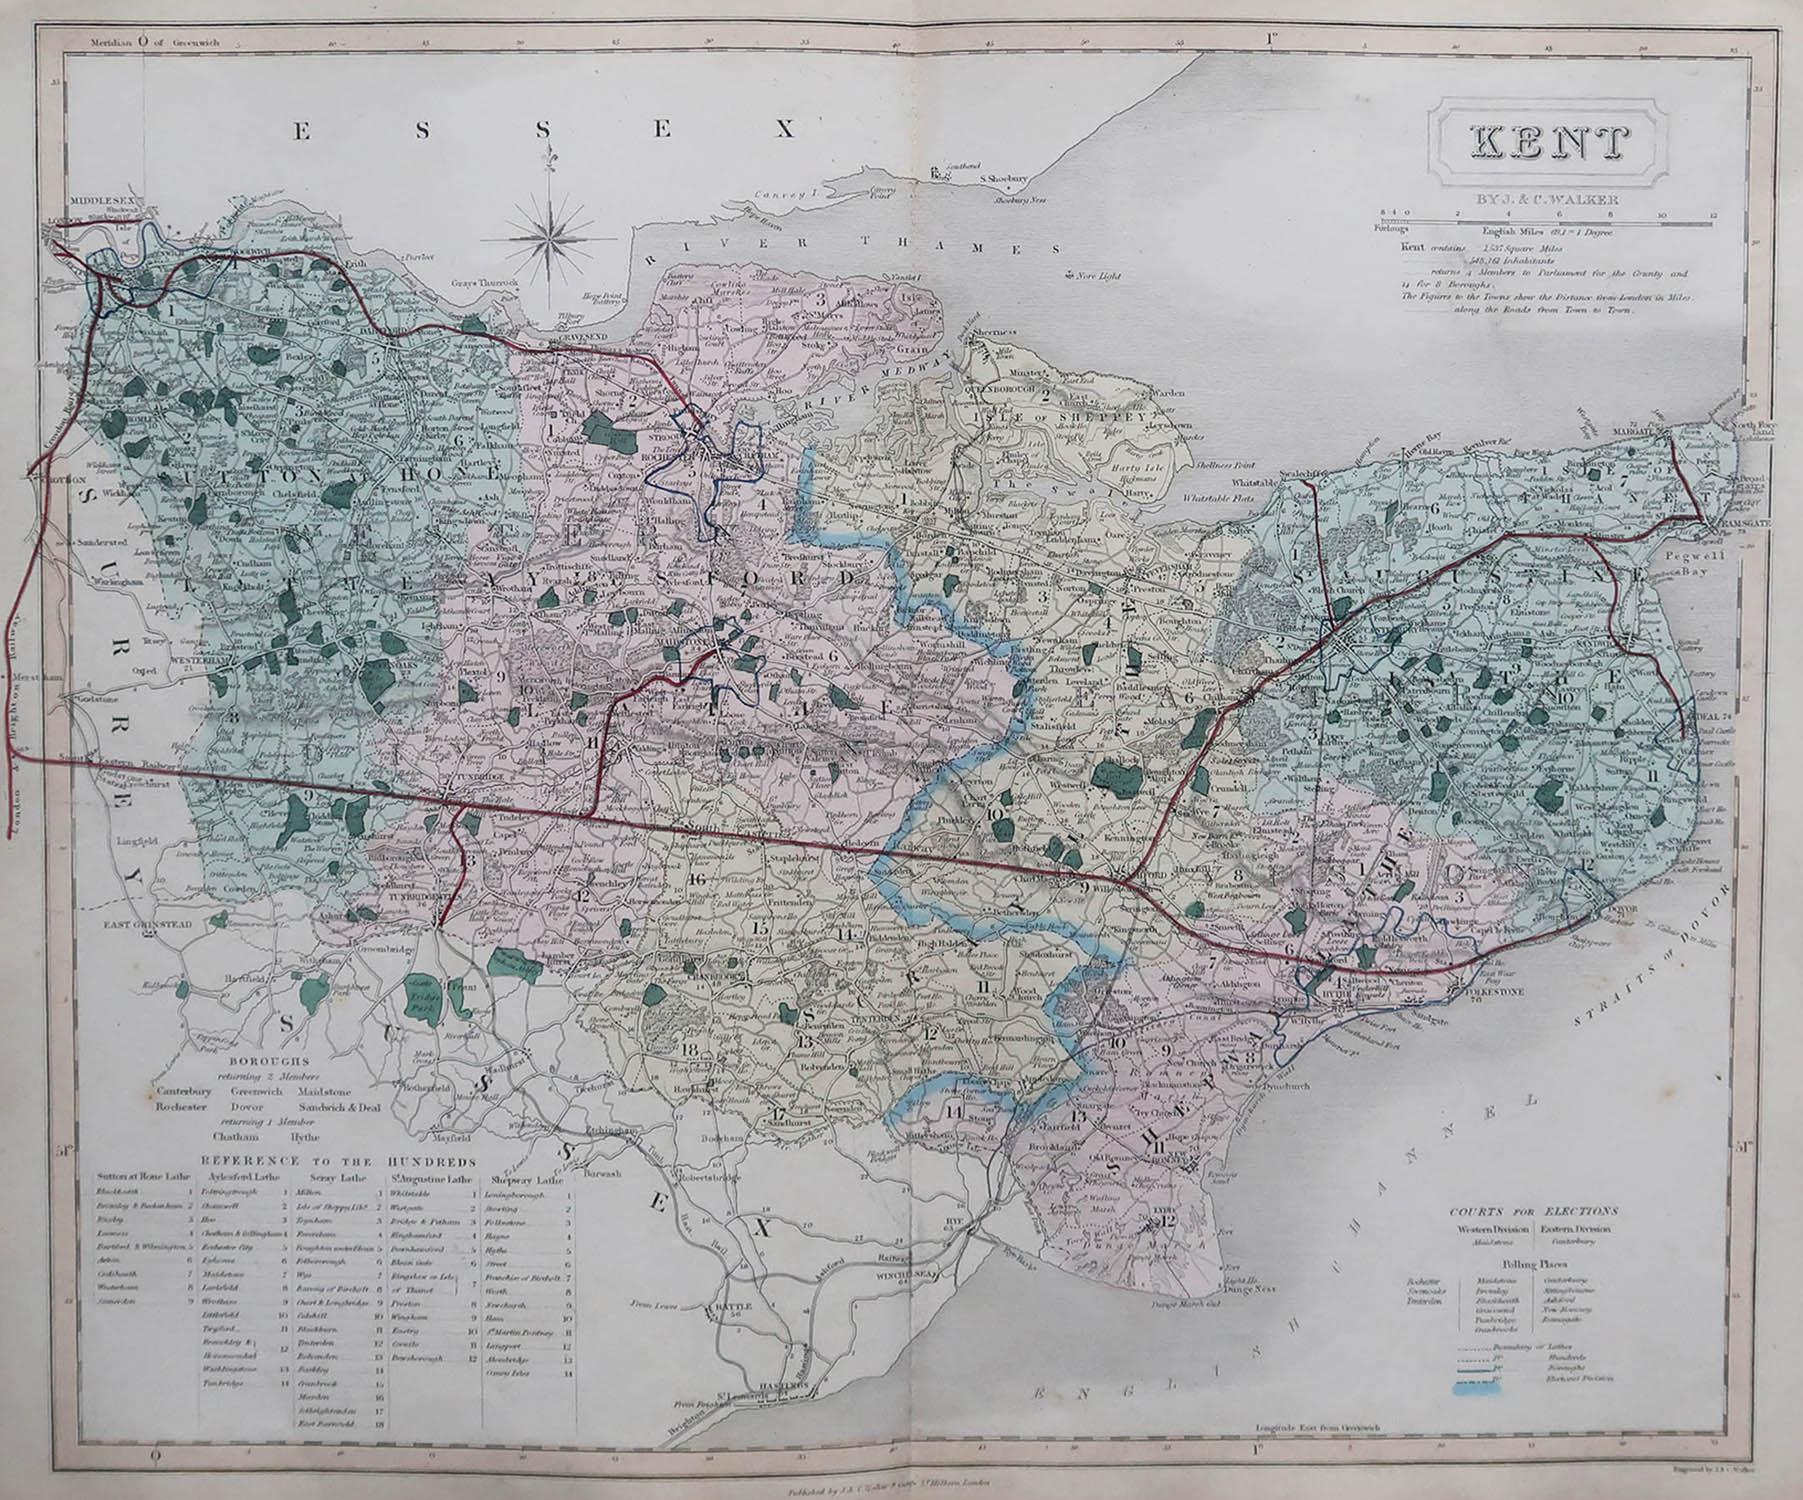 Great map of Kent

Original colour

By J & C Walker

Published by Longman, Rees, Orme, Brown & Co. 1851

Unframed.




